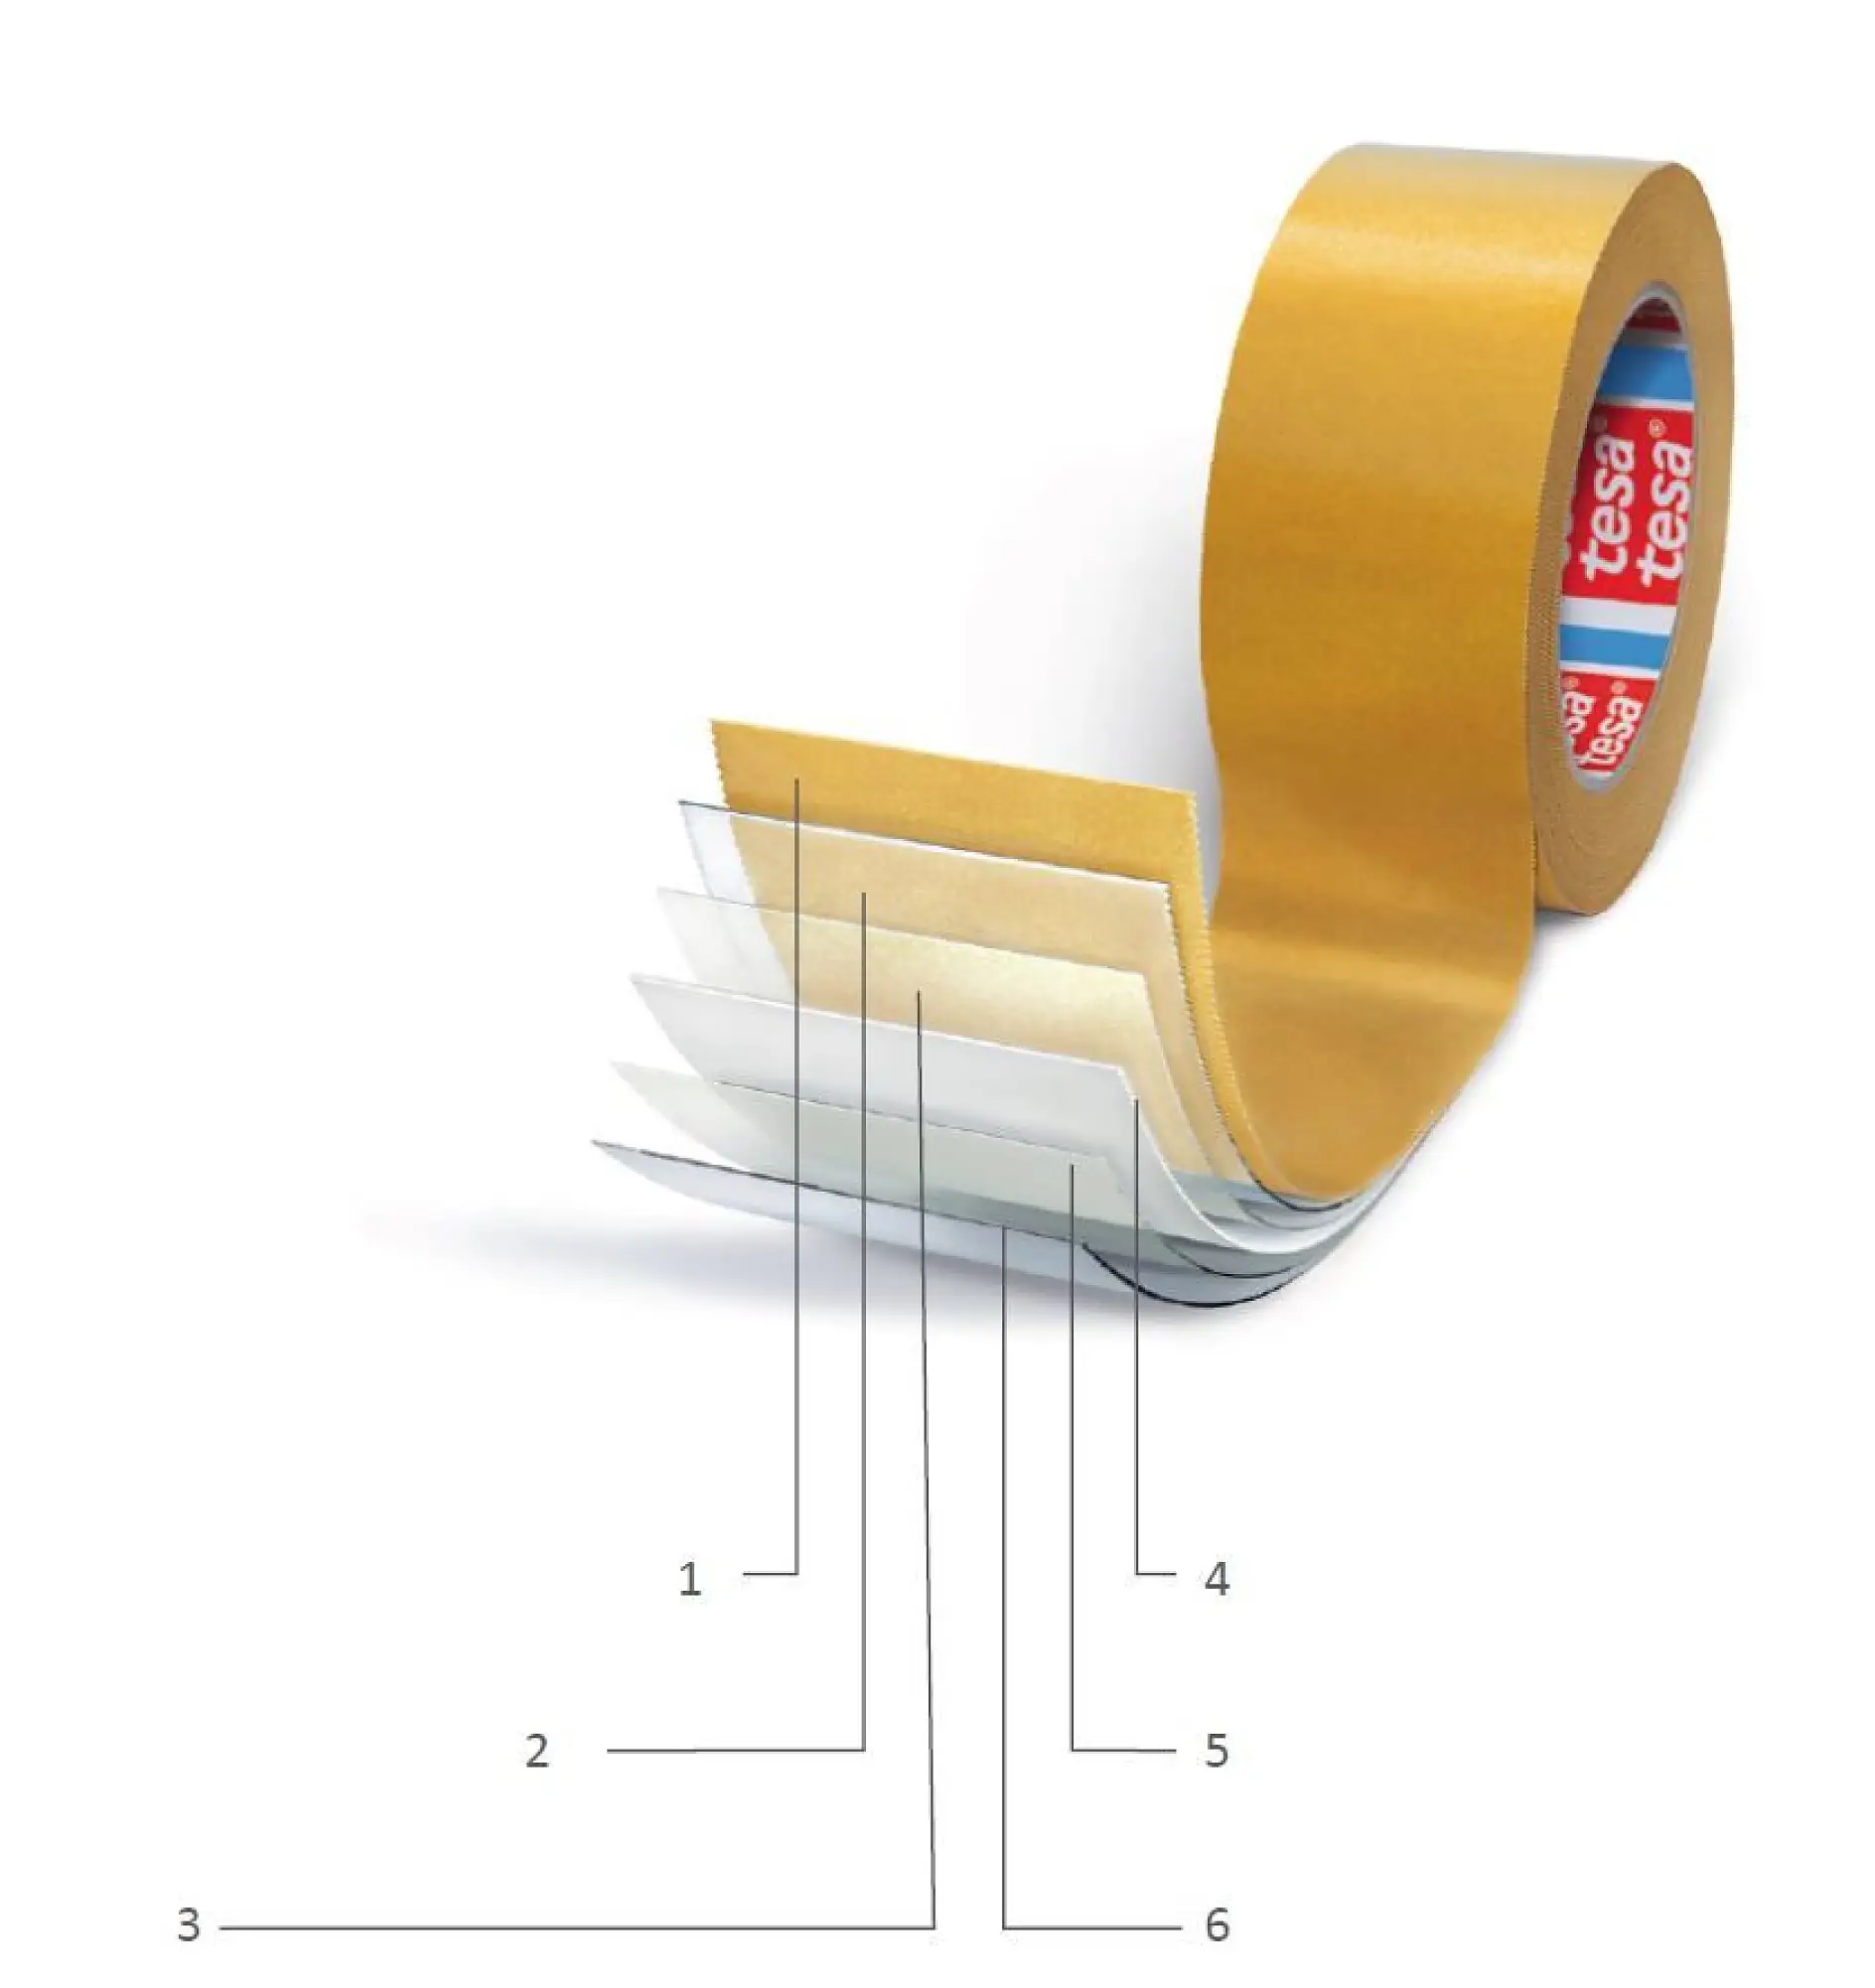 Structure of double-sided adhesive tape: 1) Release liner (silicon coated), 2) Adhesive (closed side), 3) Primer, 4) Backing, 5) Primer, 6) Adhesive (open side)